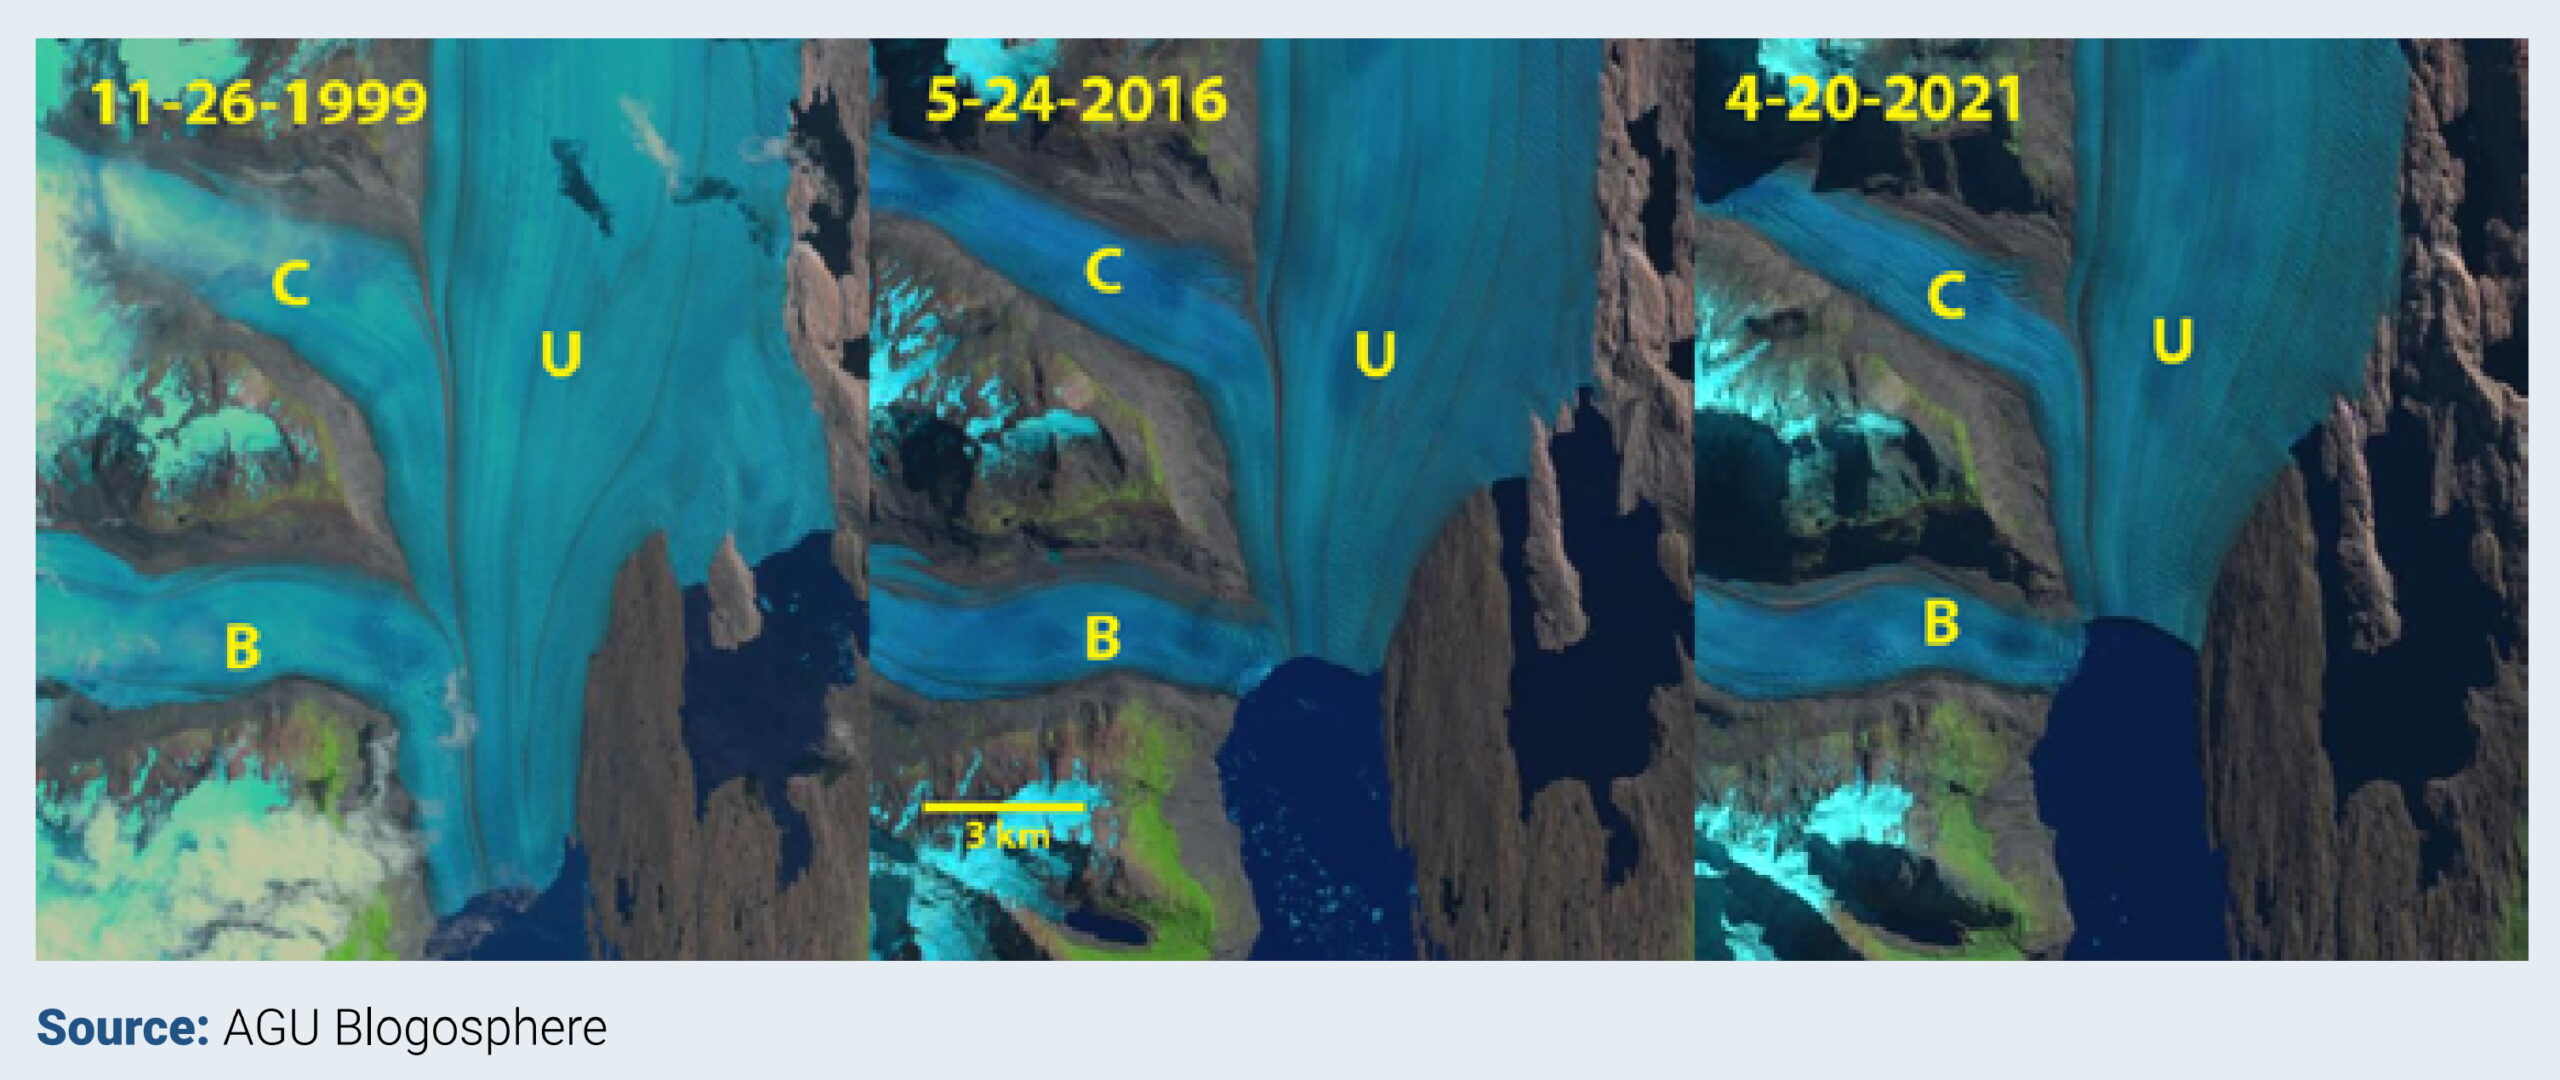 Landsat images from 1999, 2016, and 2021 illustrating both the retreat and the separation of the Upsala Glacier (U) from Bertacchi Glacier (B) in Los Glaciares National Park (Argentina). Cono Glacier (C) is the next tributary to the north. Photo: AGU Blogosphere